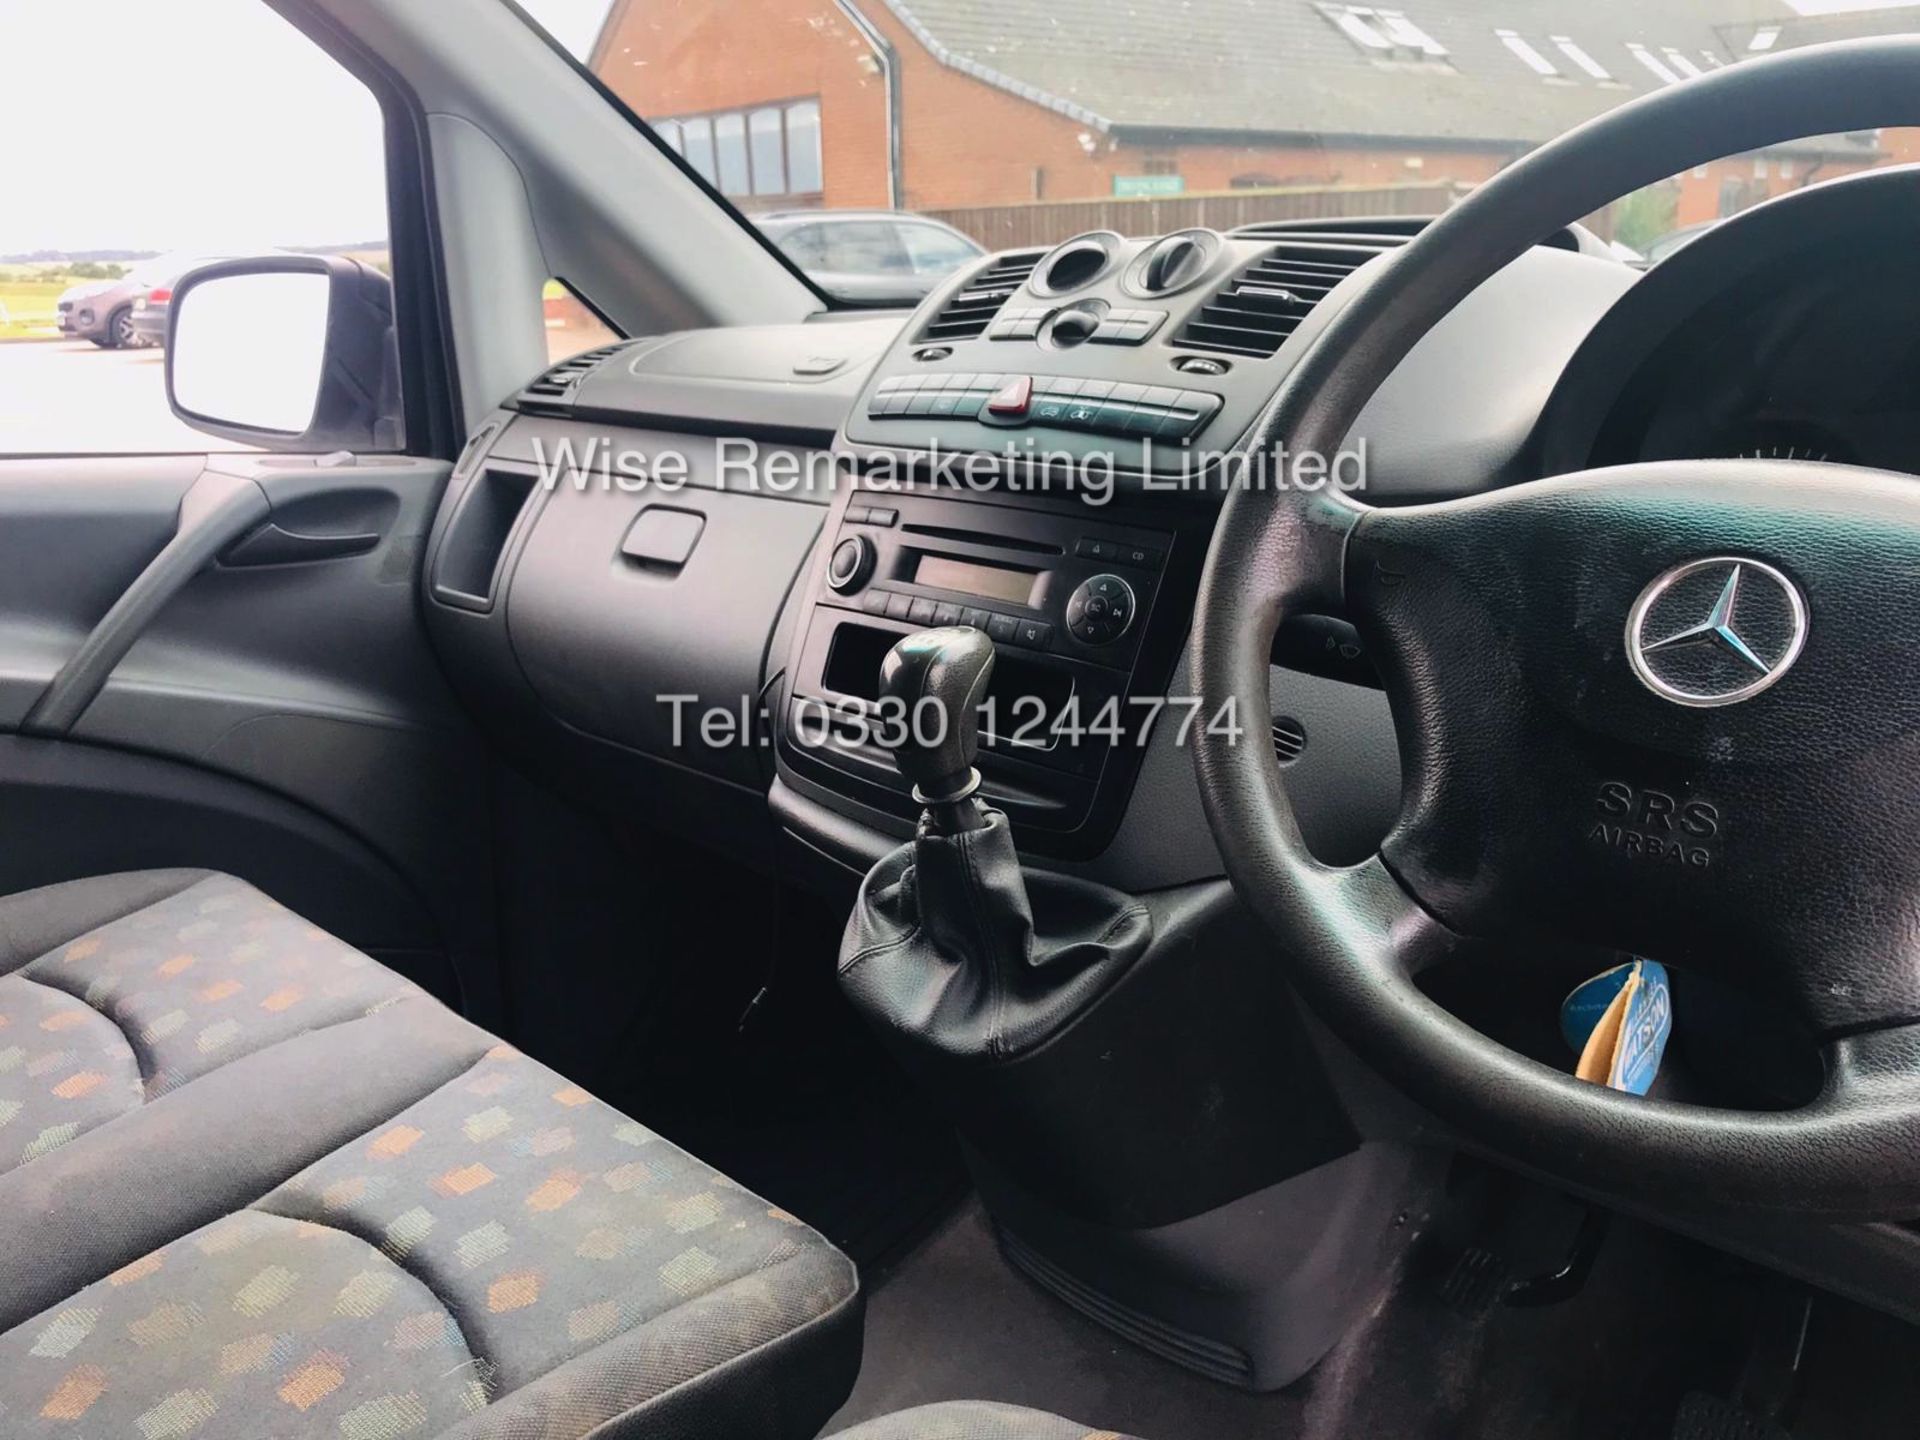 MERCEDES VITO 109 2.1 CDI LONG (2010 MODEL) 3 SEATER *SAVE 20%* - Image 16 of 20